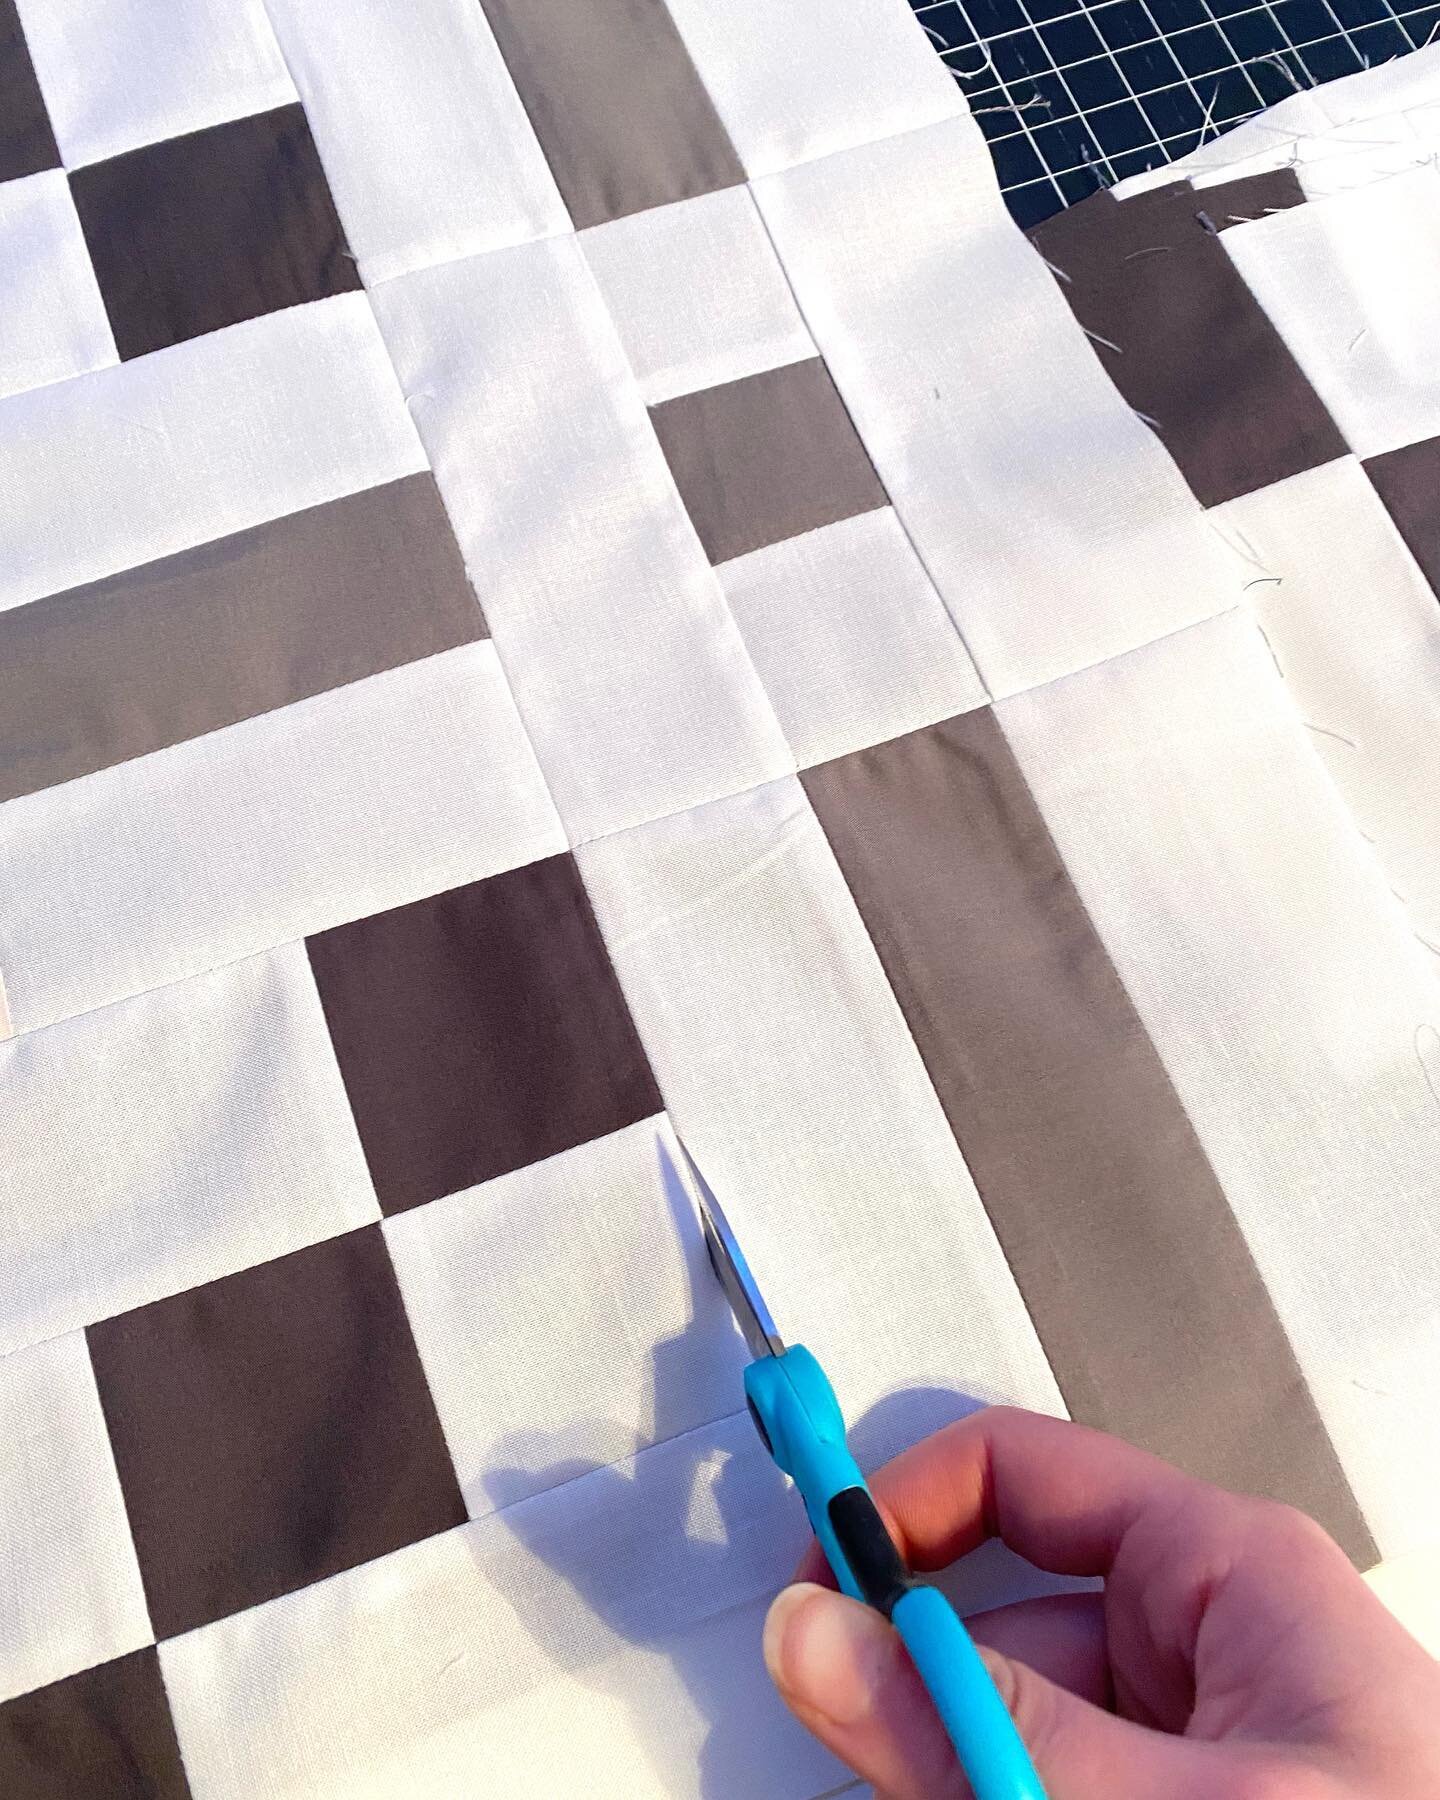 I few weeks back I shared in my stories that I like to use scissors to seam-rip my blocks apart. I call it a &ldquo;Trash Panda Quilting&rdquo; technique. 🦝 It&rsquo;s def not for the faint of heart. 😂

#sennaquilt #alexandrabordallo #rpqsmakes #we